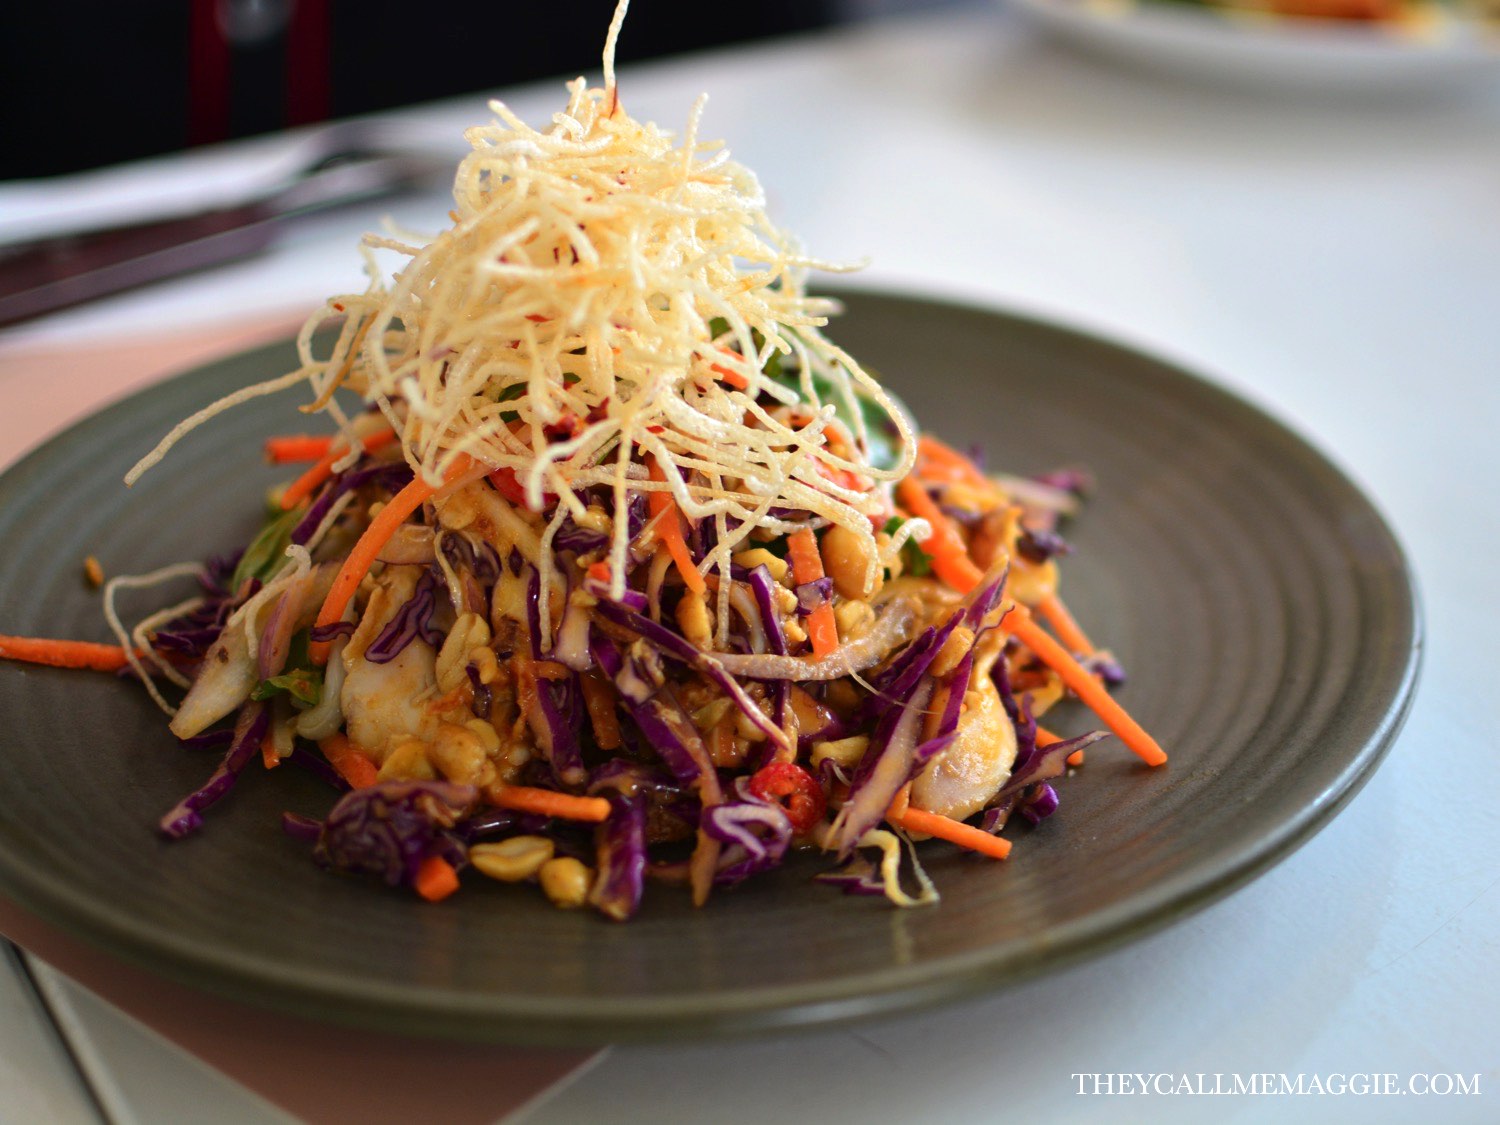  Warm red curry chicken salad - with Asian slaw and peanuts.&nbsp; 